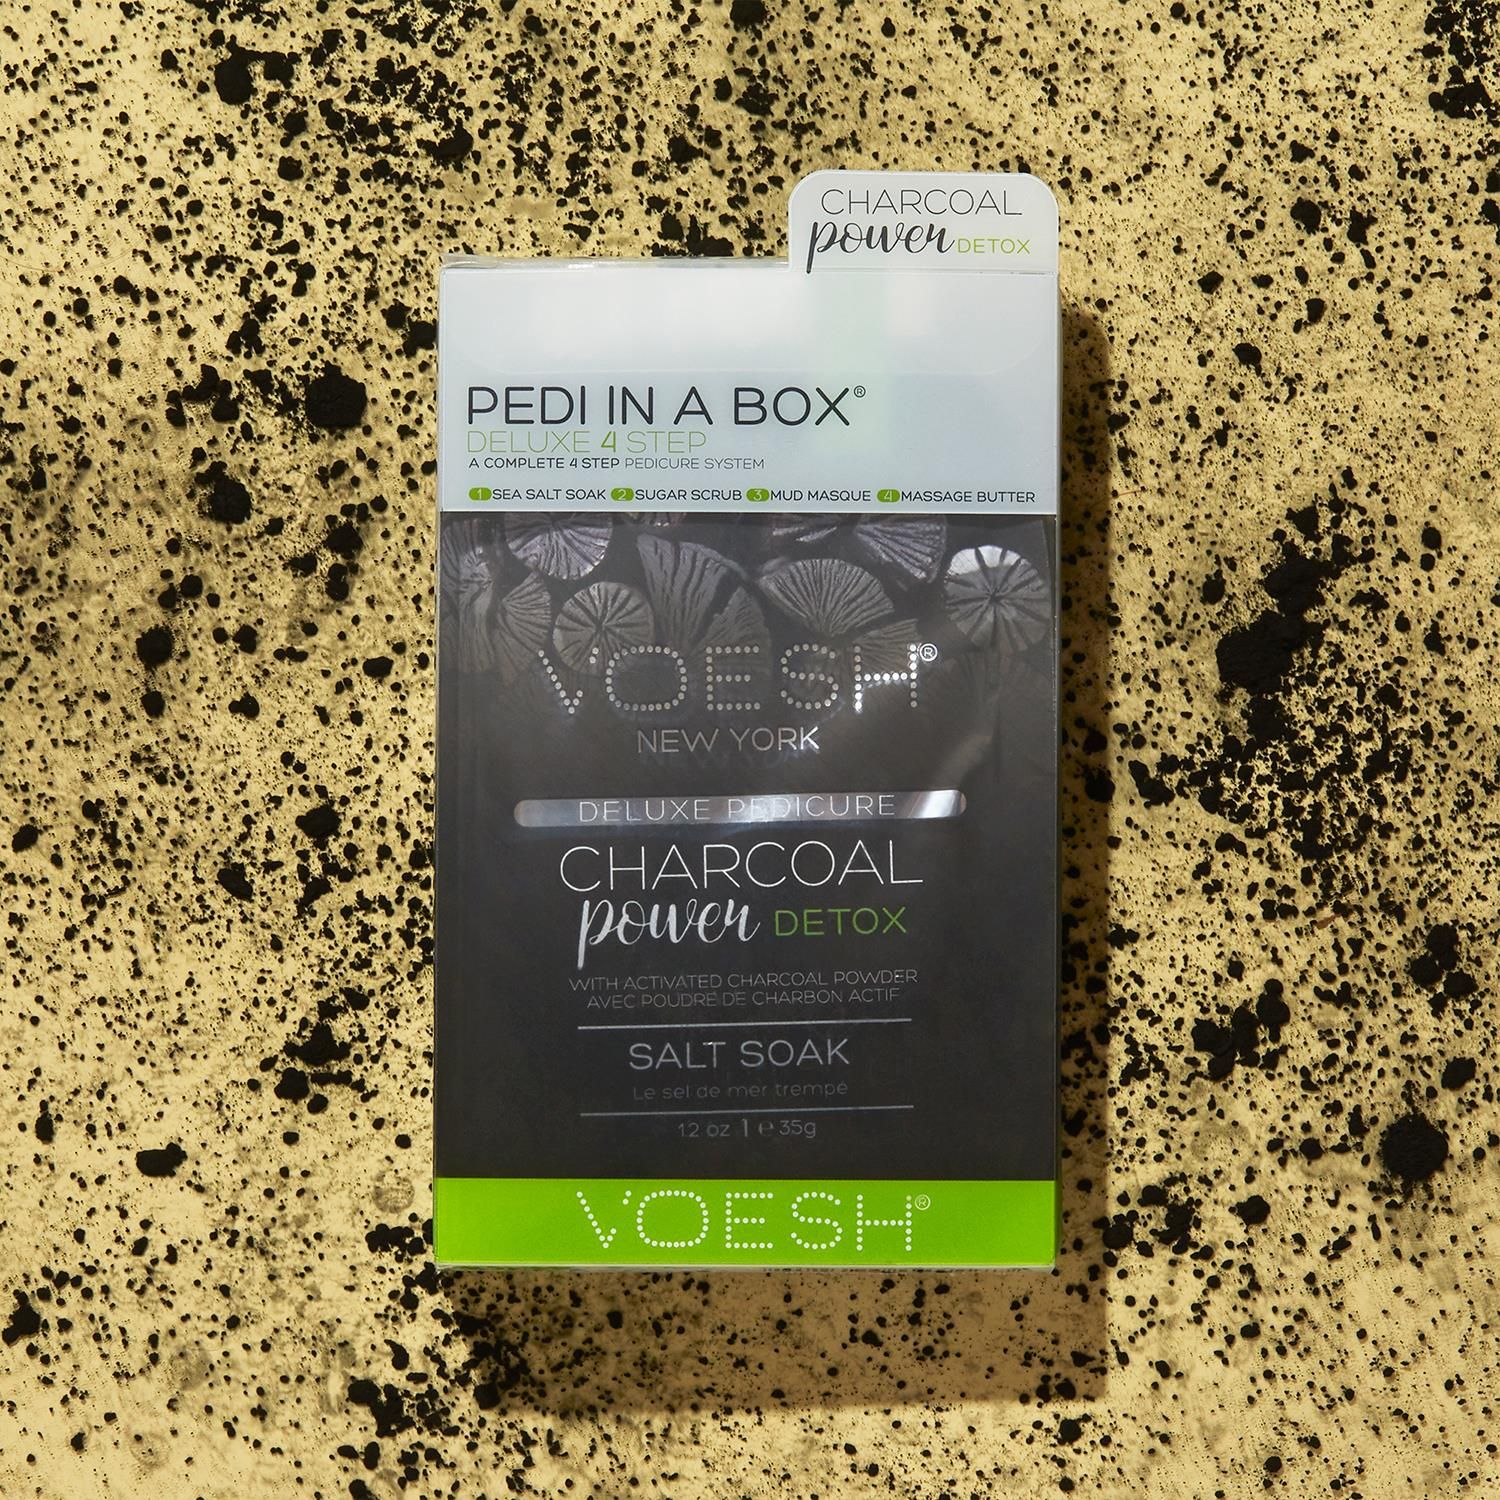 Voesh Charcoal Power Detox Deluxe 4Step Pedicure In A Box with Charcoal Extract.   The Cleanest And Most Hygienic Spa Pedicure Solution. Enriched With Key Ingredients To Give Your Feet The Nutrition It Needs. Each Product Is Individually Packed With The Right Amount For A Single Pedicure.

The Perfect Pedi For:
DIY At-Home Pedicure
Date Night
Bachelorette Parties
Girls’ Night In

The kit contains:
Sea Salt Soak: This soak helps relieve tension, stiffness, minor aches and discomfort in your feet. It helps detox and deodorize the feet.
Sugar Scrub: The scrub gently exfoliates dead skin cells and helps soften your feet. Perfect for use on the soles on your feet.
Mud Masque: The masque removes deep-seated impurities in your skin leaving your feet feeling clean and revived.
Massage Cream: The massage cream hydrates and soothes skin. It softens the soles of your feet and helps prevent dryness and roughness.

4 Step Includes
Sea Salt Soak 35g: to detox & deodorize the feet.
Sugar Scrub 35g: to gently exfoliate dead skin.
Mud Masque 35g: to deep cleanse impurities.
Massage Butter 35g: to hydrate and soothe skin.